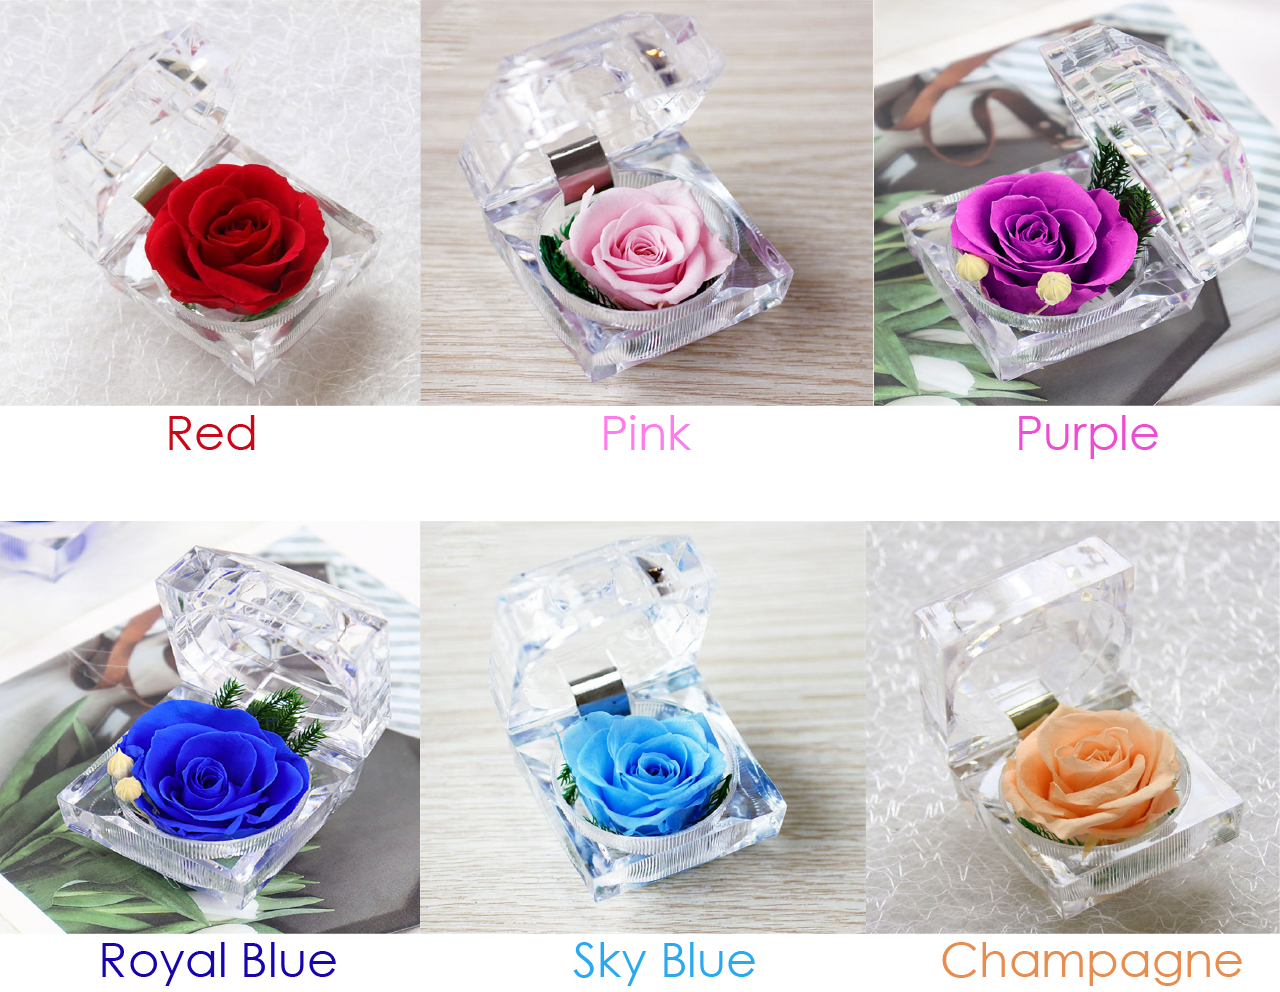 N - Real Rose Crystal Ring Box Preserved Flower Gift